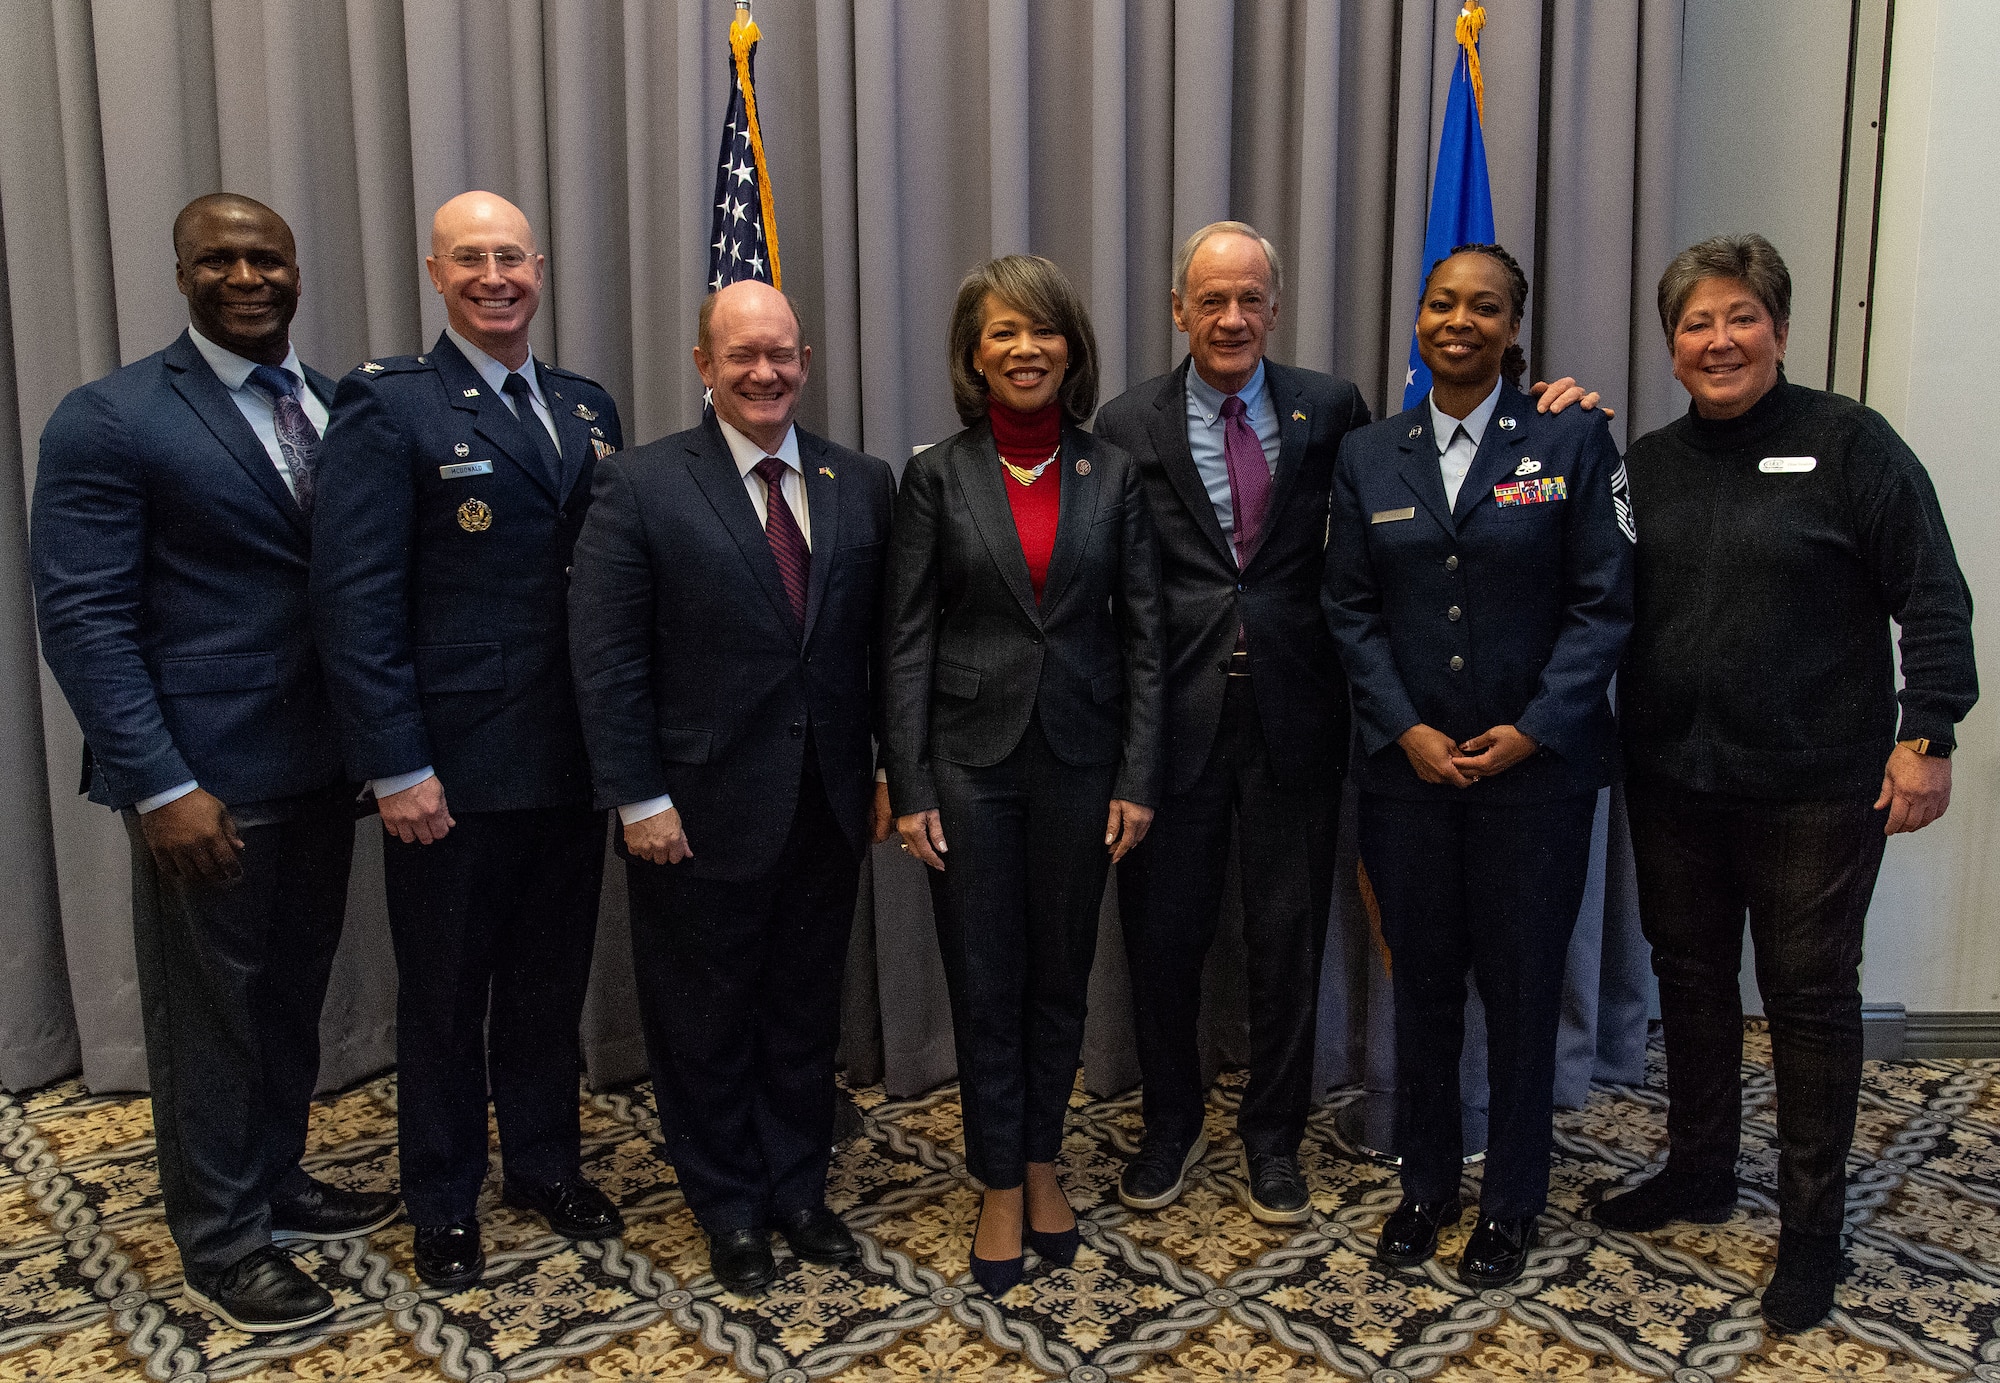 U.S. Air Force Col. Chris McDonald, 436th Airlift Wing commander, second from left, and Chief Master Sgt. Carolyn Russell, 436th AW command chief, second from right, stand with U.S. congressional delegates from Delaware as well as Central Delaware Chamber of Commerce members, at the 2023 State of the Base briefing on Dover Air Force Base, Delaware, Nov. 20, 2023. The event was hosted by the CDCC and informed attendees on community partnership initiatives and the impact that Team Dover has on the state and local economies. (U.S. Air Force photo by Roland Balik)